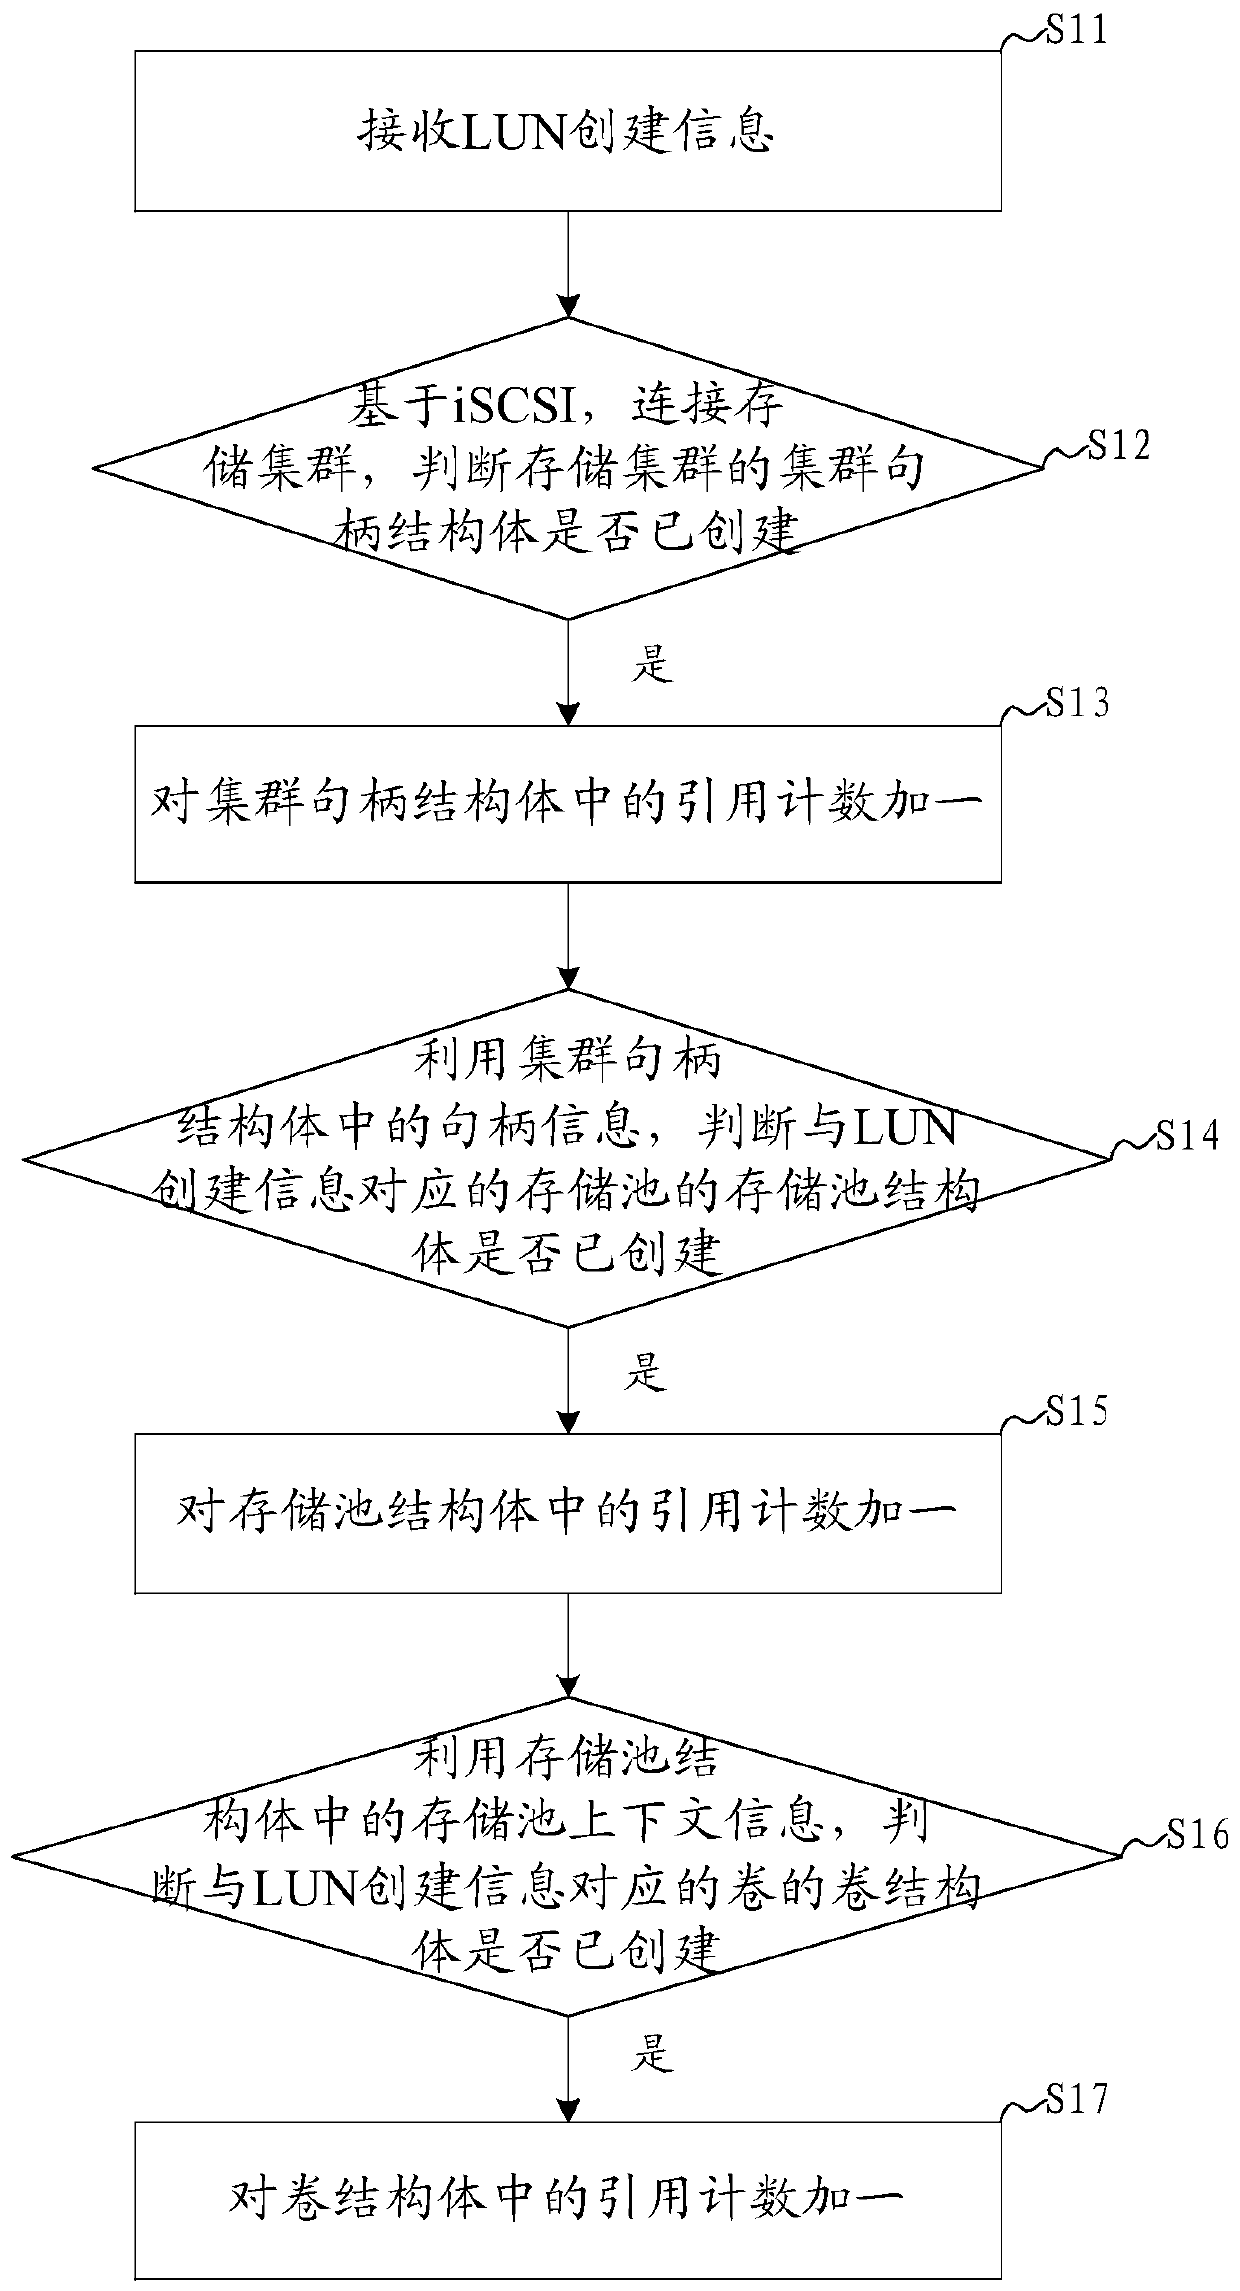 Tgt-based cluster handle management method, system and device and readable storage medium